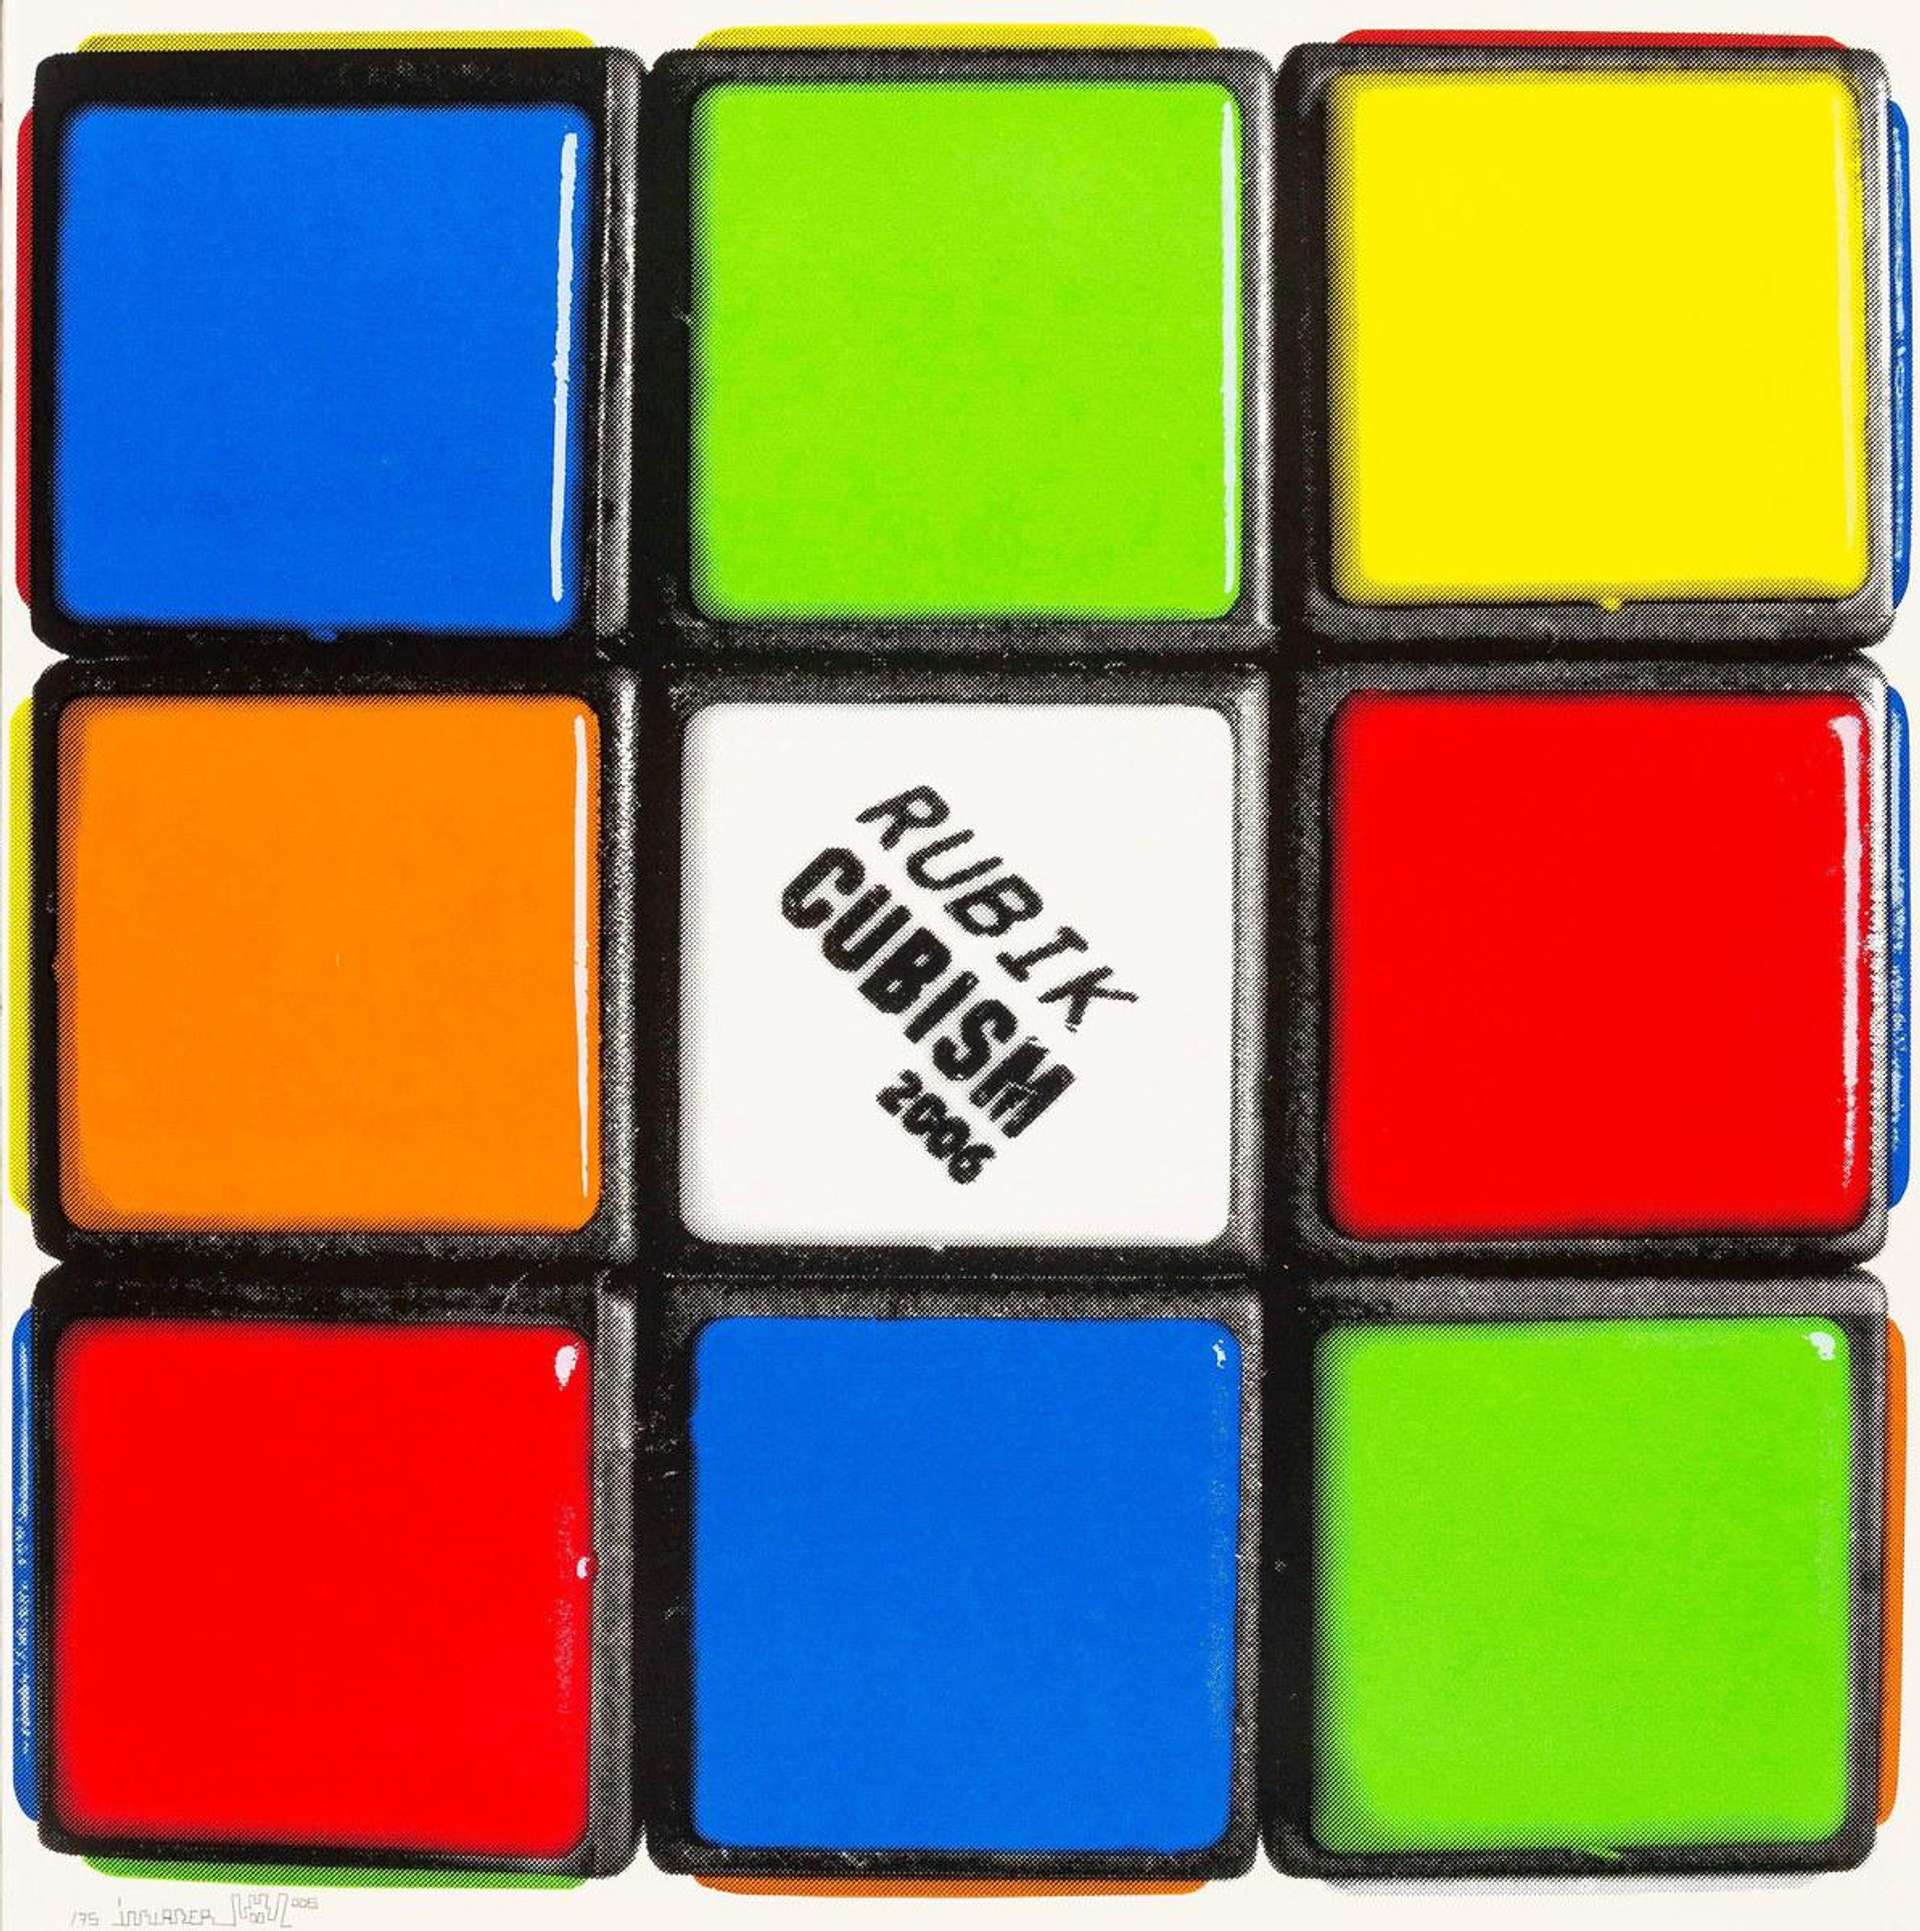  Here Invader portrays one face of a Rubik's Cube, arranged in a mixed manner so as to show all six colours, the white square in the middle stating Rubik Cubism 2006 in capital letters.